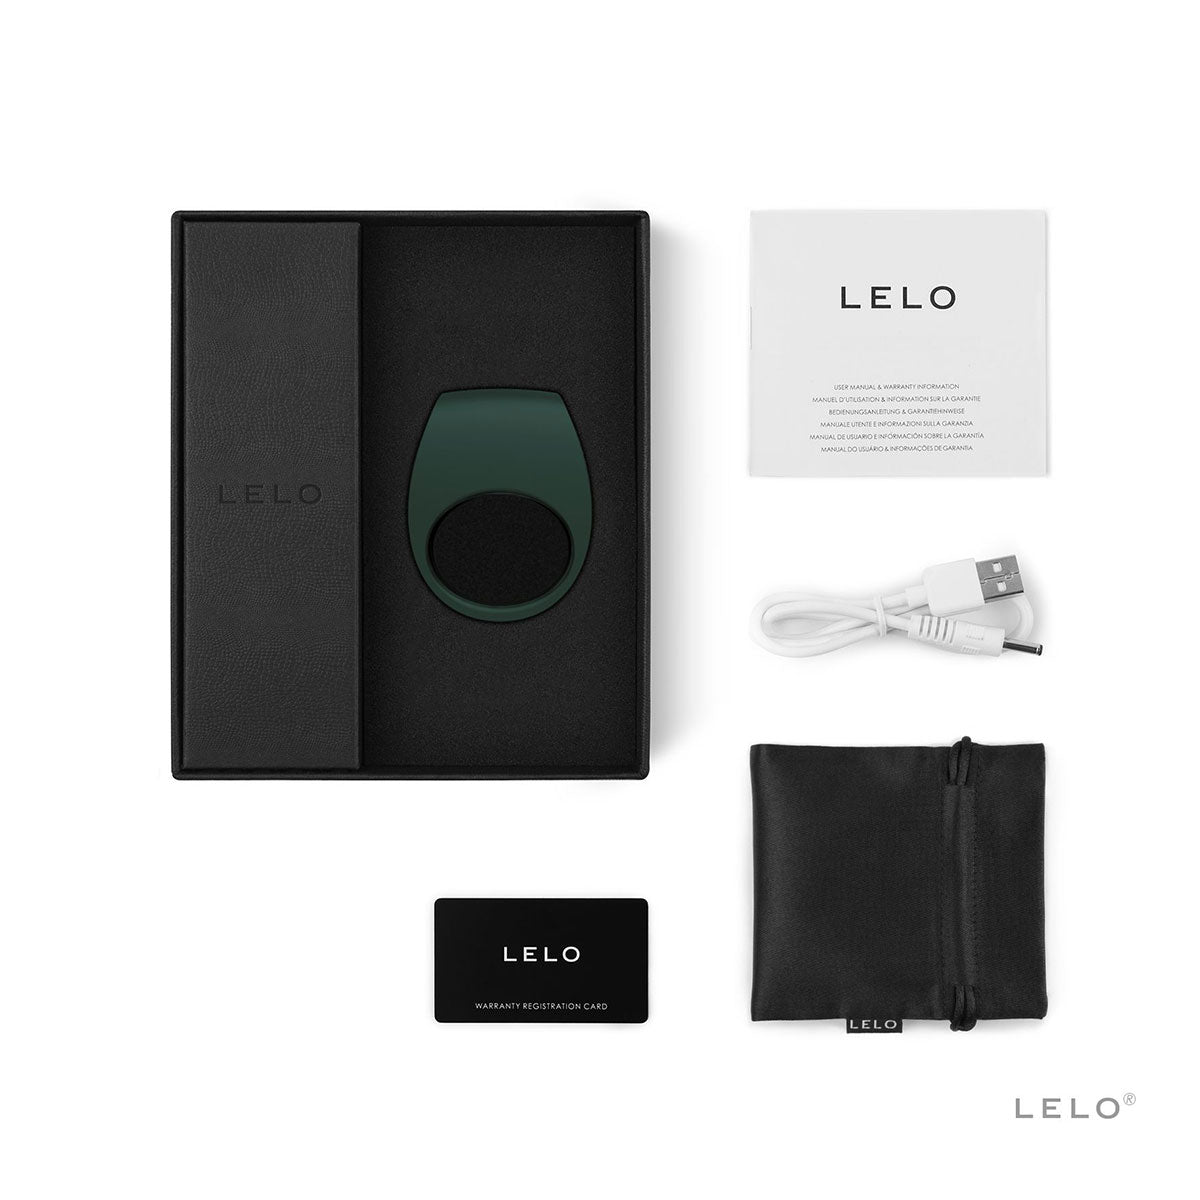 LELO Tor 2 - Green Intimates Adult Boutique